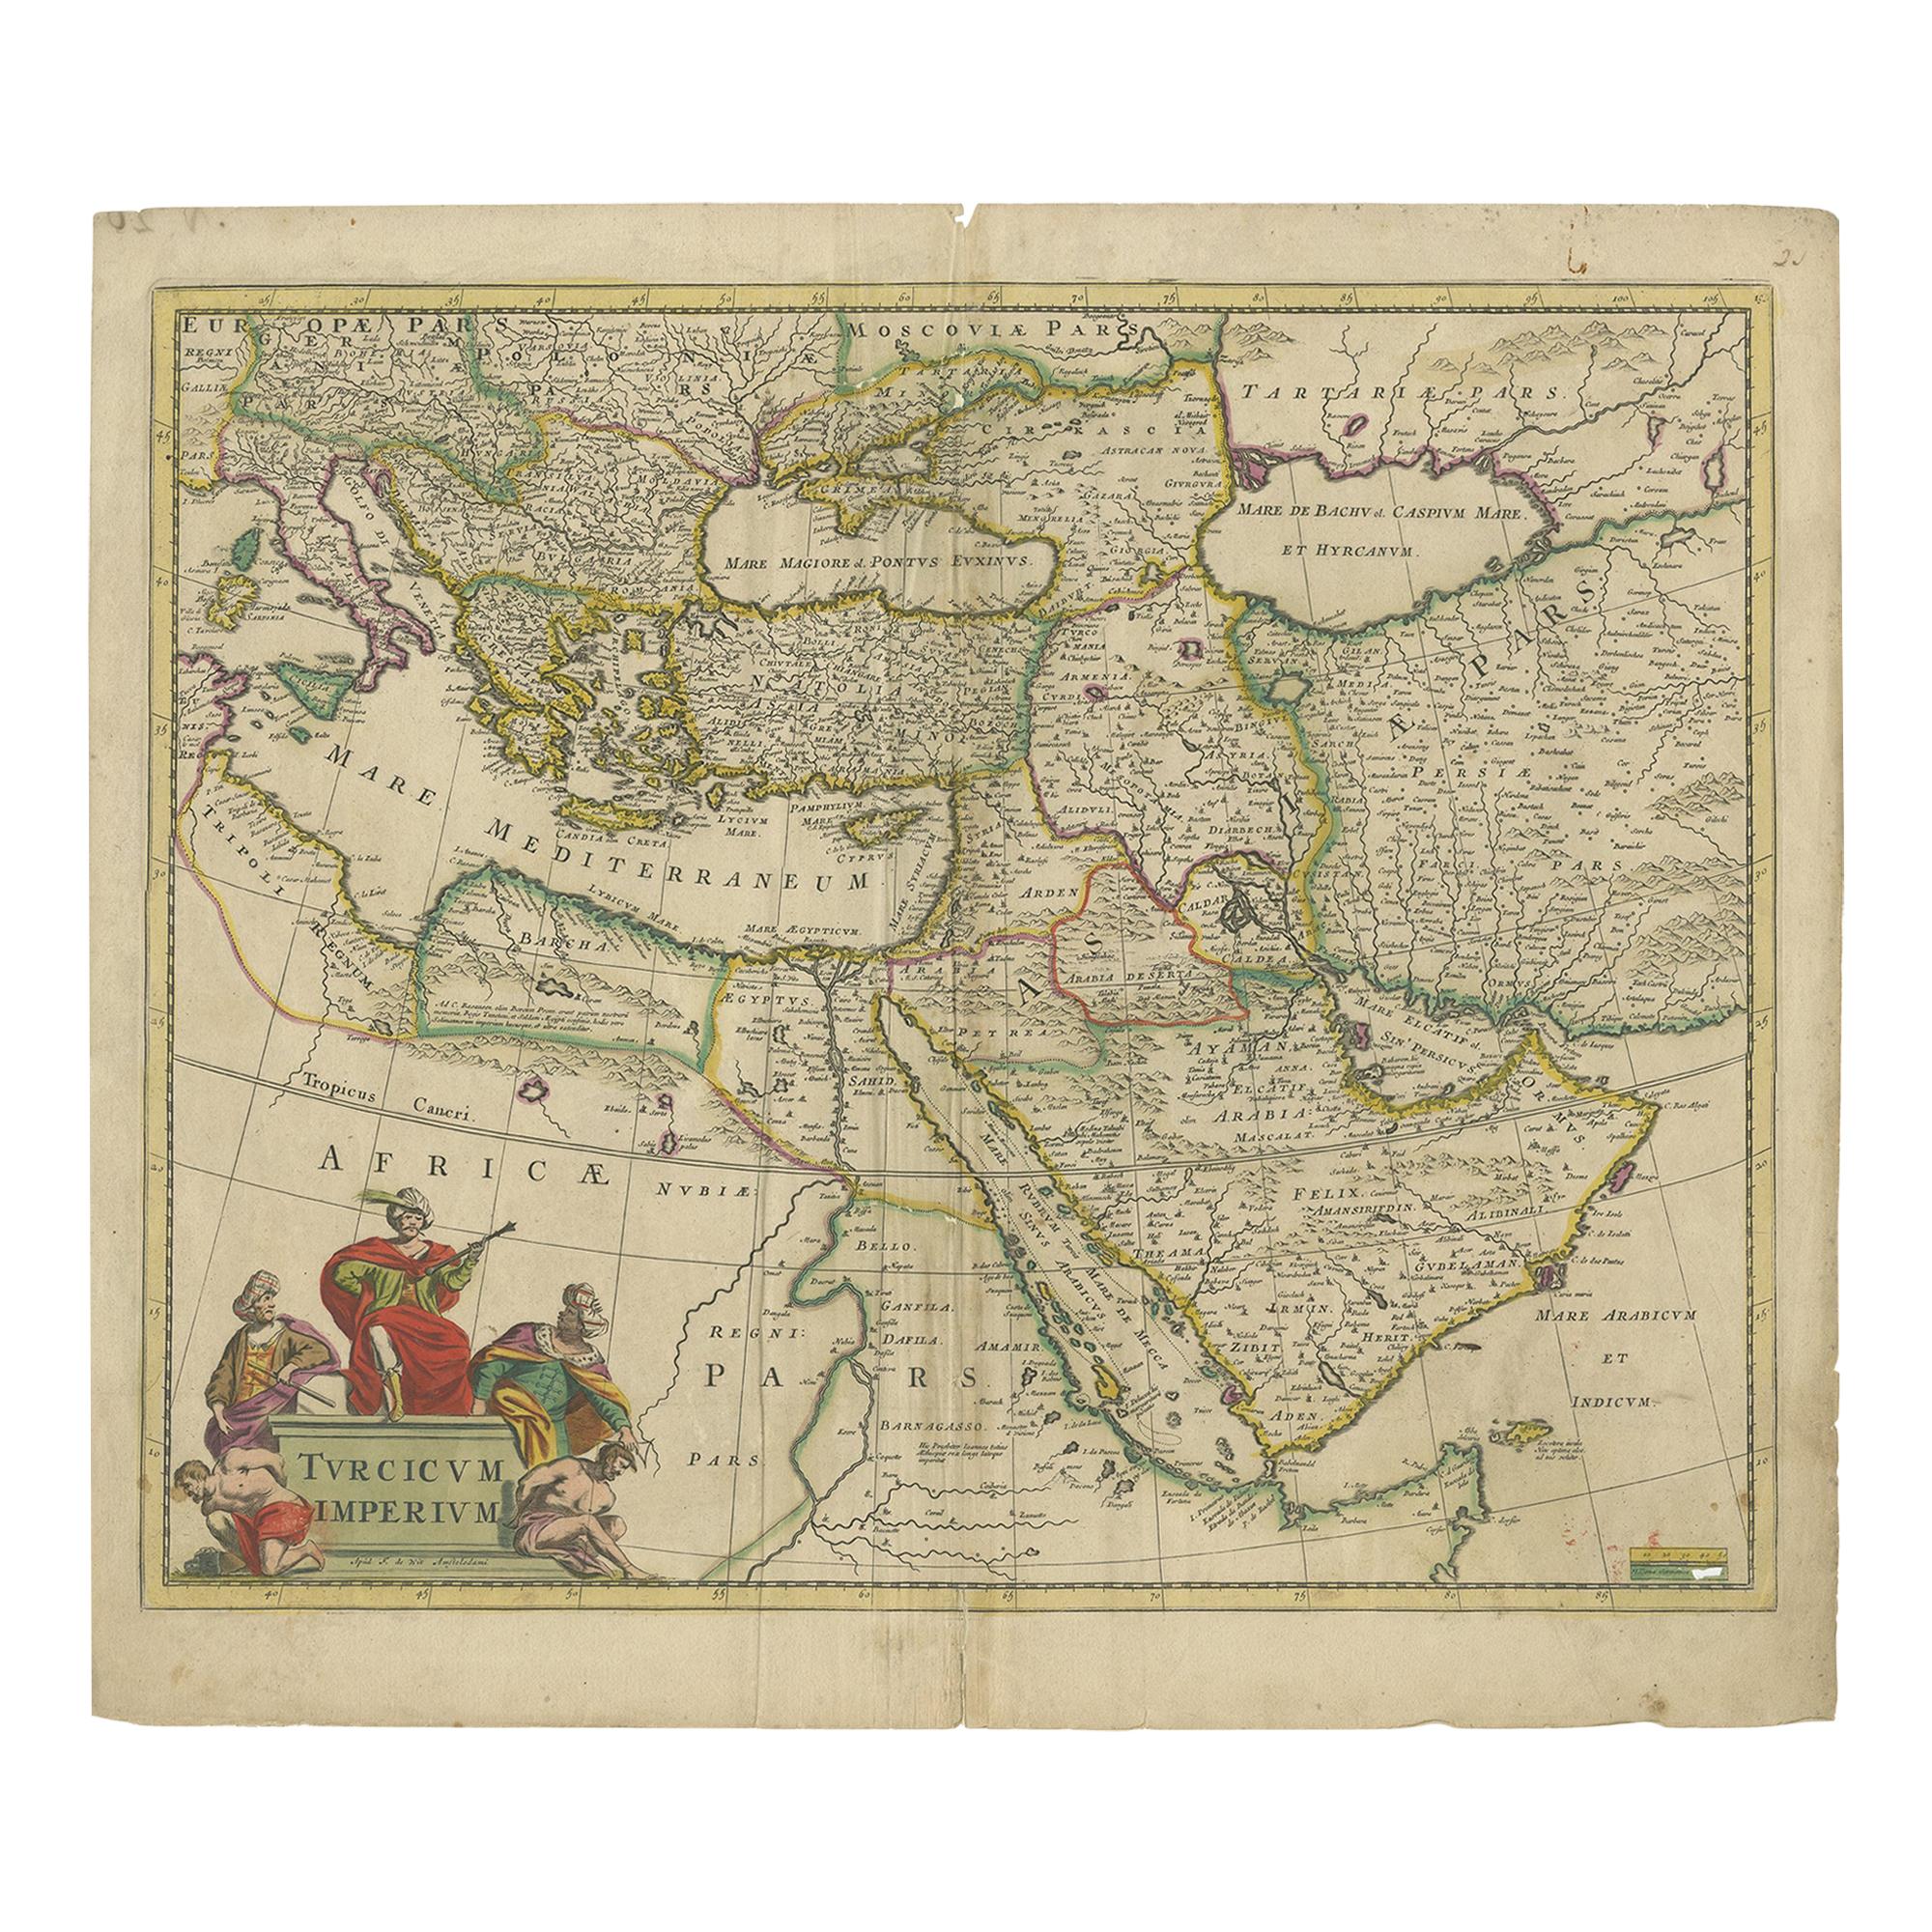 Antique map titled 'Turcicum Imperium'. 

Original antique map of the Turkish Empire bounded by the Eastern Mediterranean, Greece, and Italy in the West and Saudi Arabia, the Persian Gulf and Caspian Sea in the east and centered on Turkey and